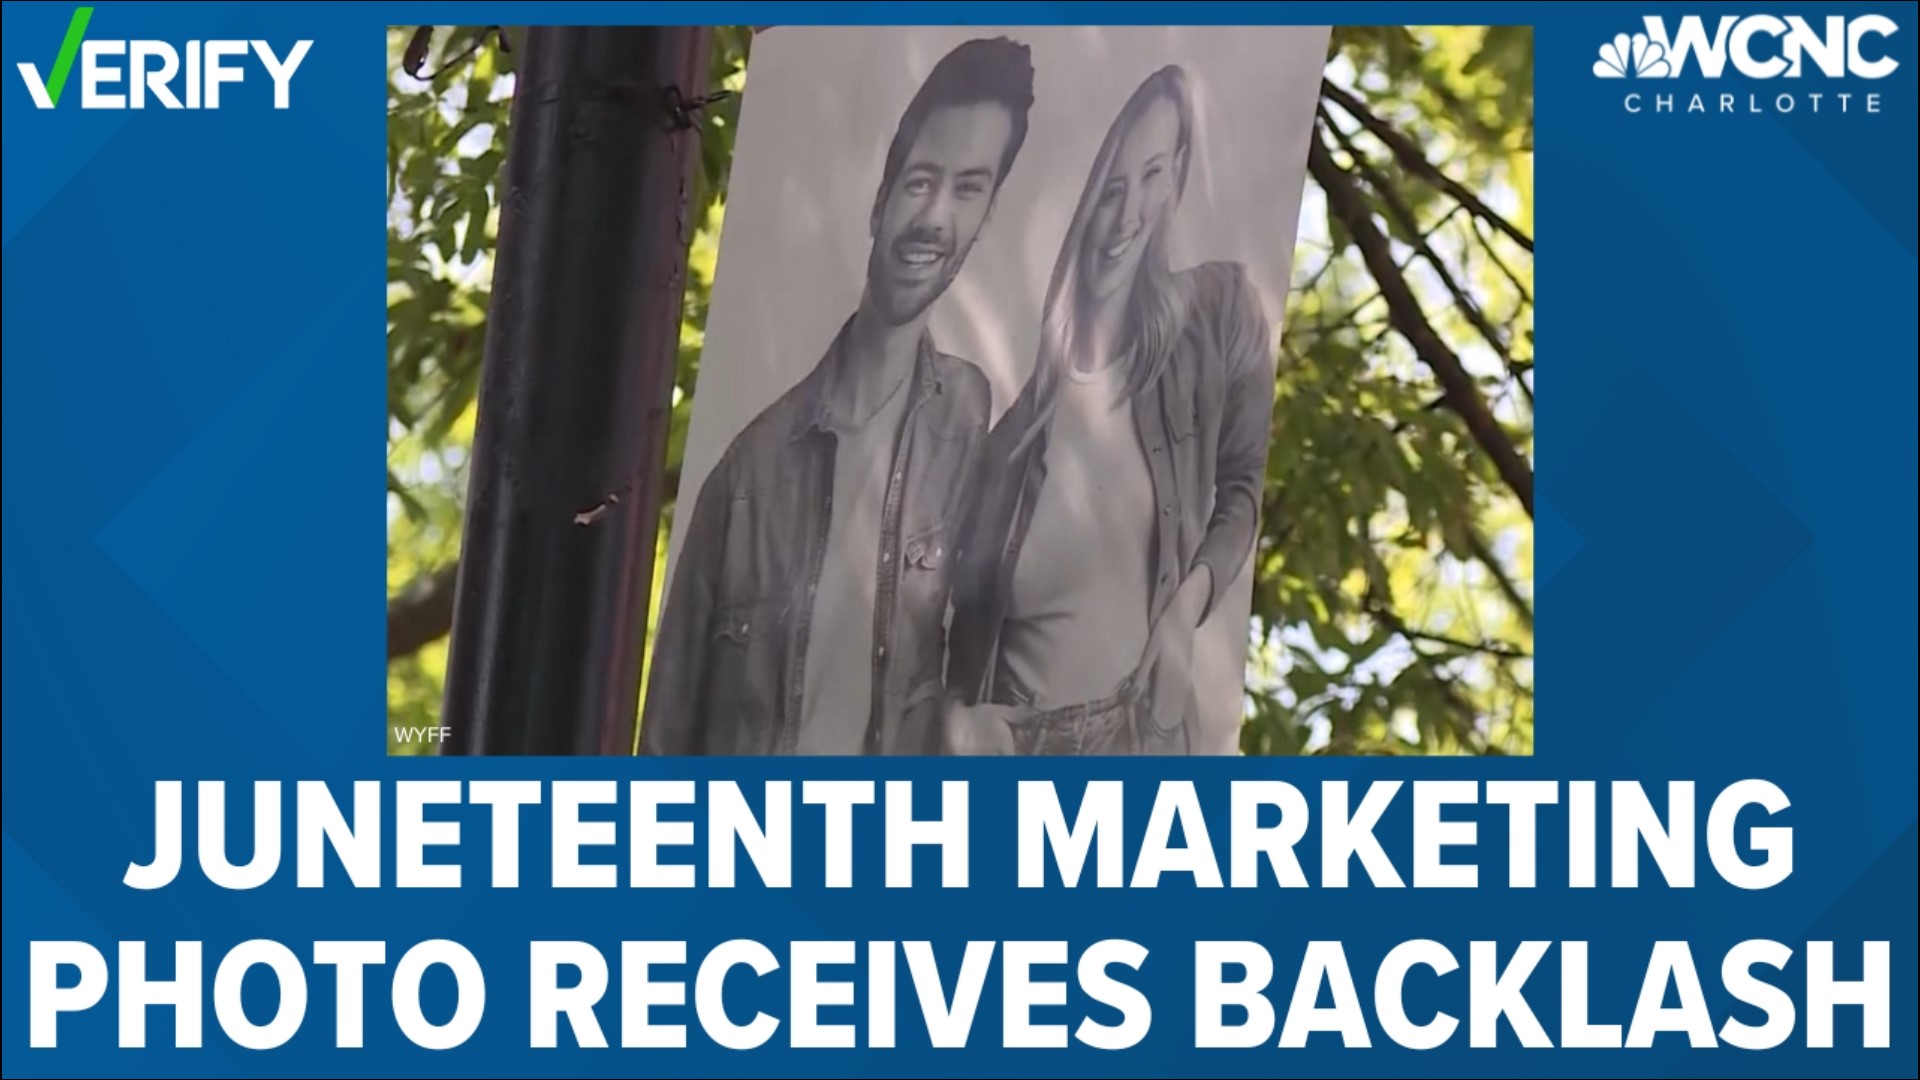 Organizers for a Juneteenth celebration in Greenville, South Carolina, are receiving backlash on social media over marketing material for the event.